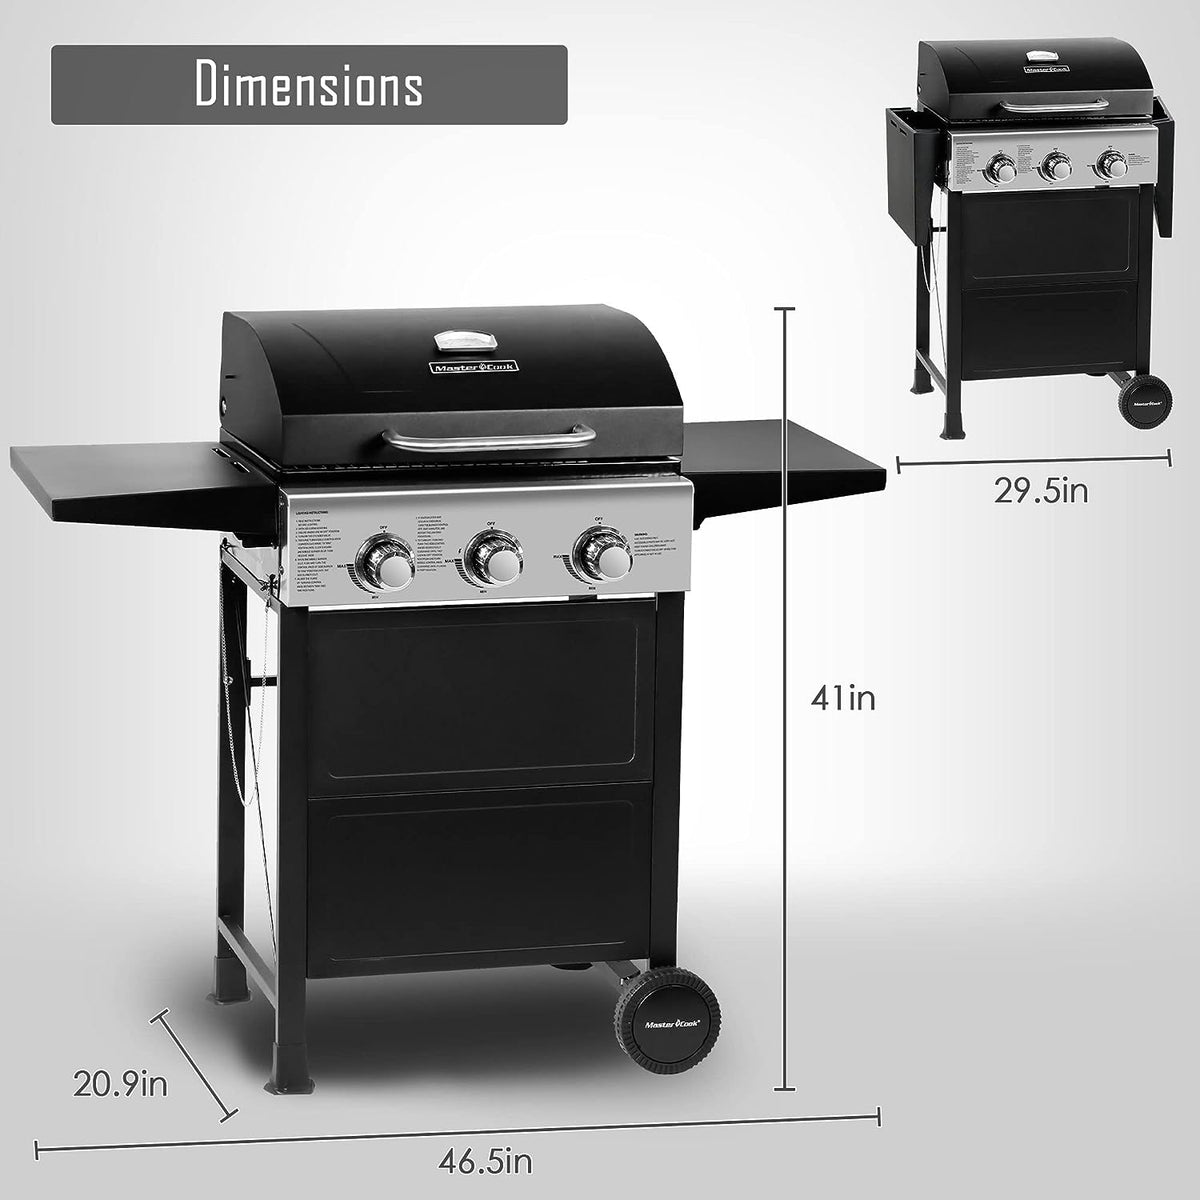 MASTER COOK 3 Burner BBQ Propane Gas Grill, Stainless Steel 30,000 BTU Patio Garden Barbecue Grill with Two Foldable Shelves - Barbecue Whizz...Watch My Smoke!